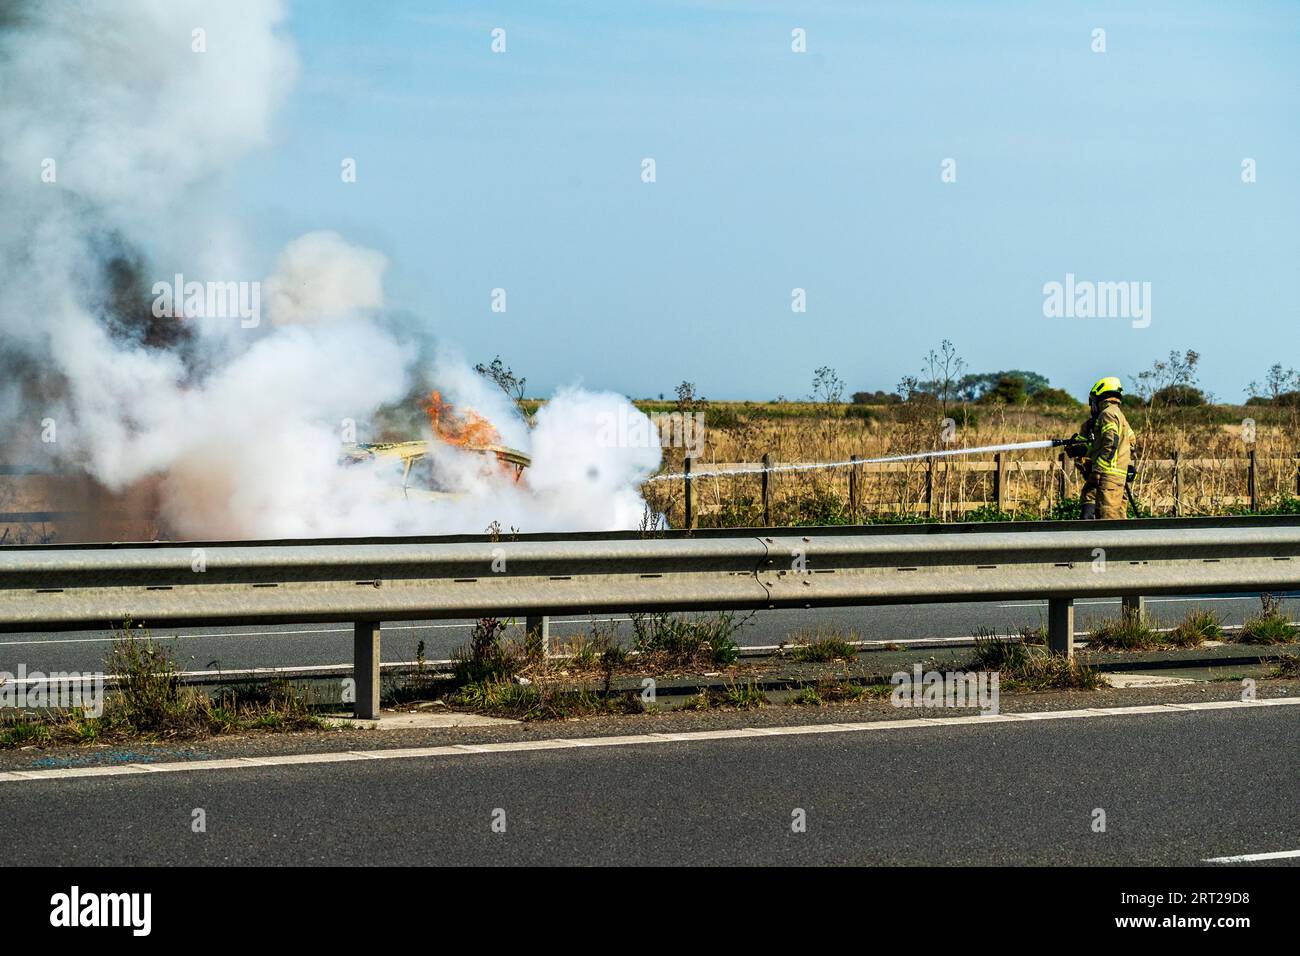 Fireman attending a car fire on a layby on a major road, A299 in the kent countryside. Fireman spraying the fire with water and chemical mix from a hose pipe causing lots of white smoke to billow from the white car. Stock Photo